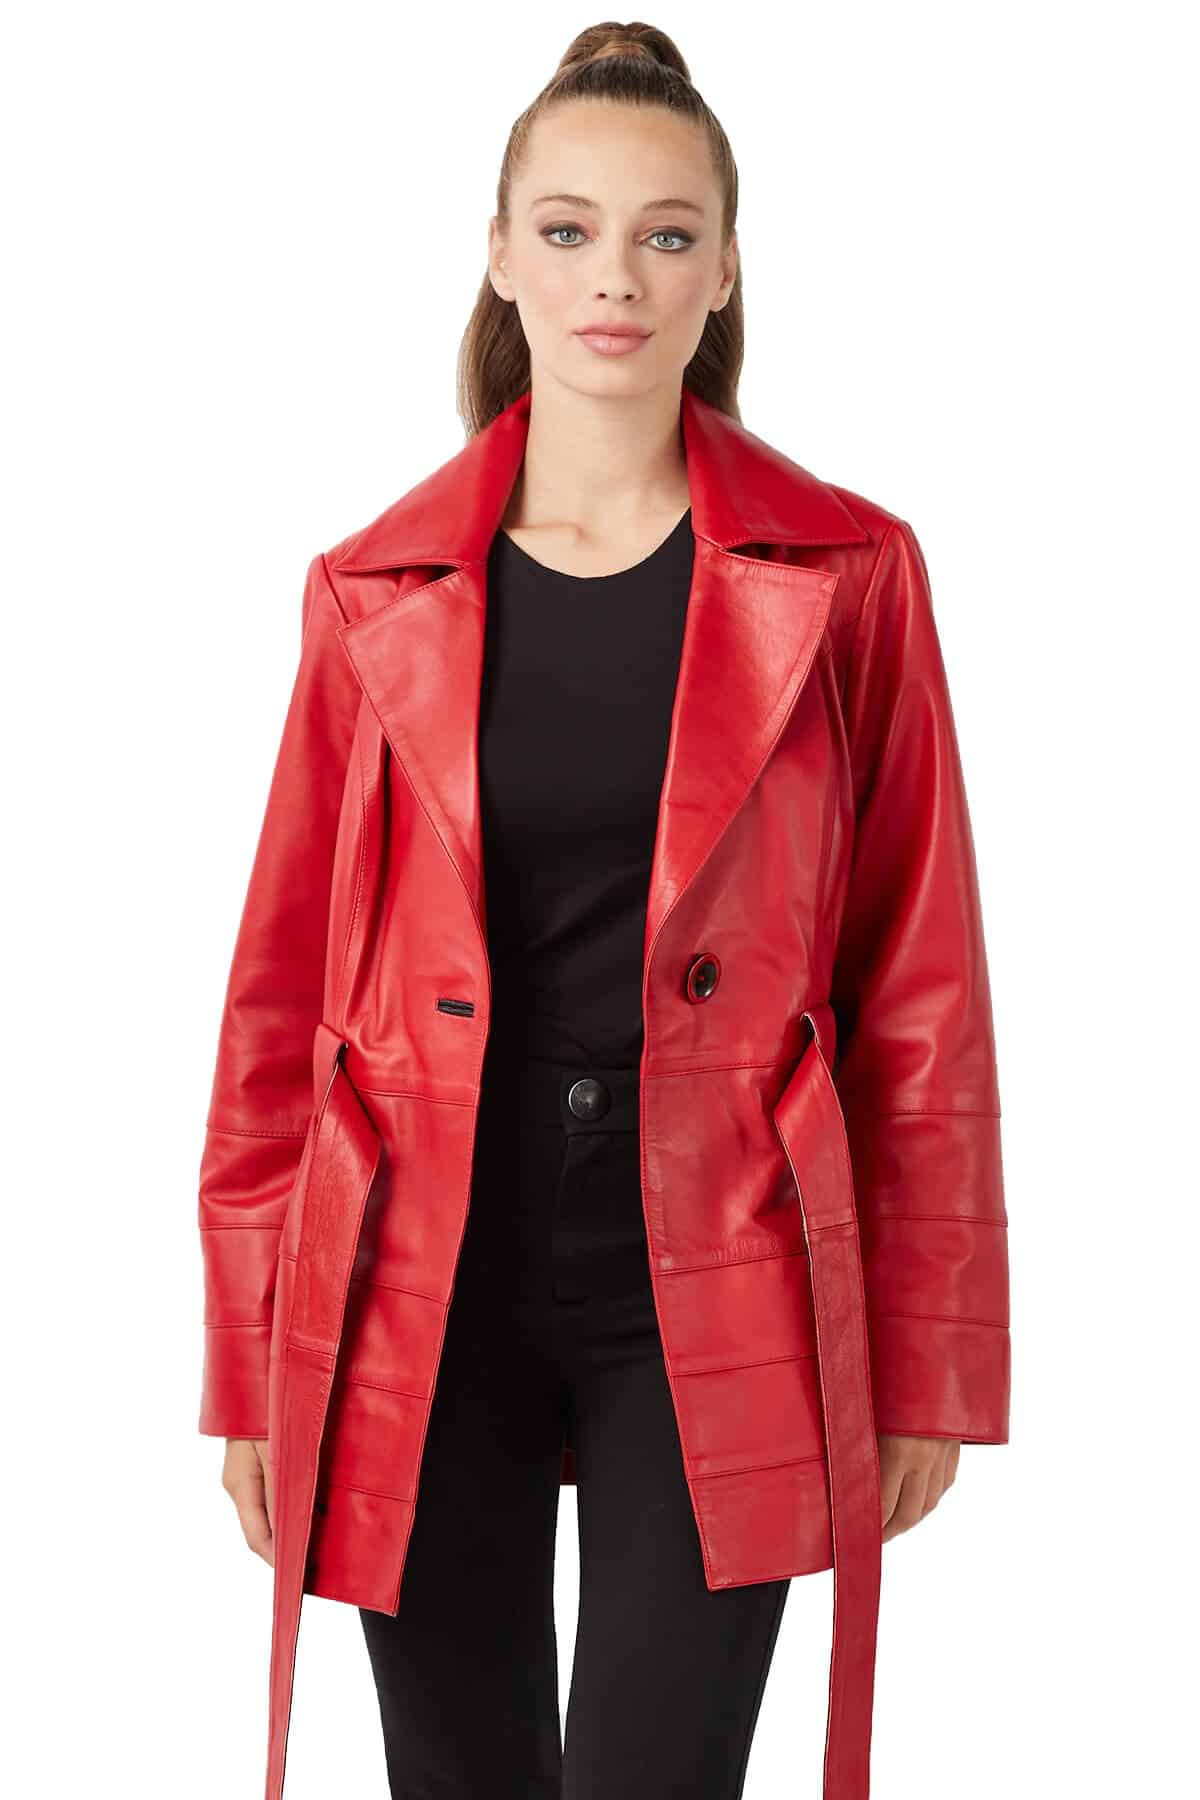 Rebecca Leather Women's Short Indian Red Trench Coat with Black Belt